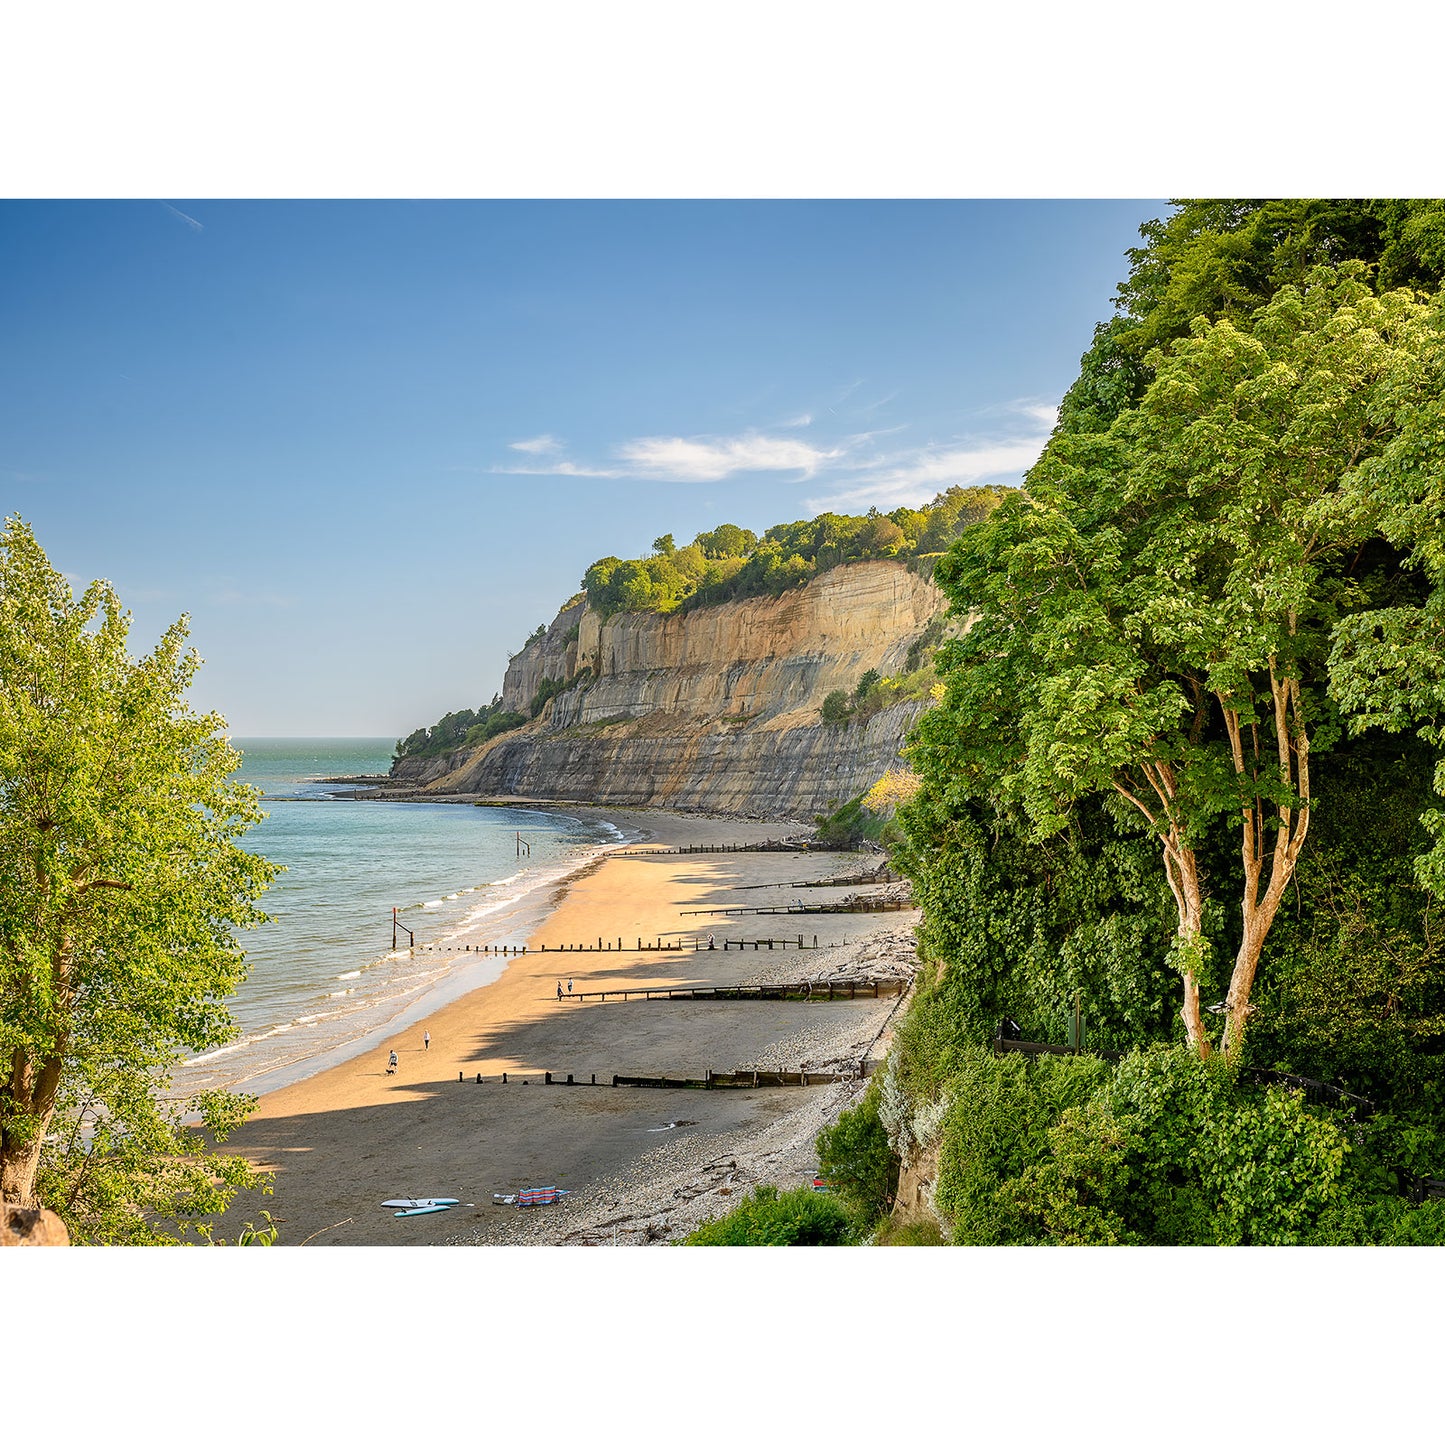 A coastal landscape featuring a sandy beach, cliffs, and green vegetation. A few scattered people can be seen along the shore and in the water under a clear blue sky, reminiscent of Shanklin Beach by Available Light Photography in our gallery.